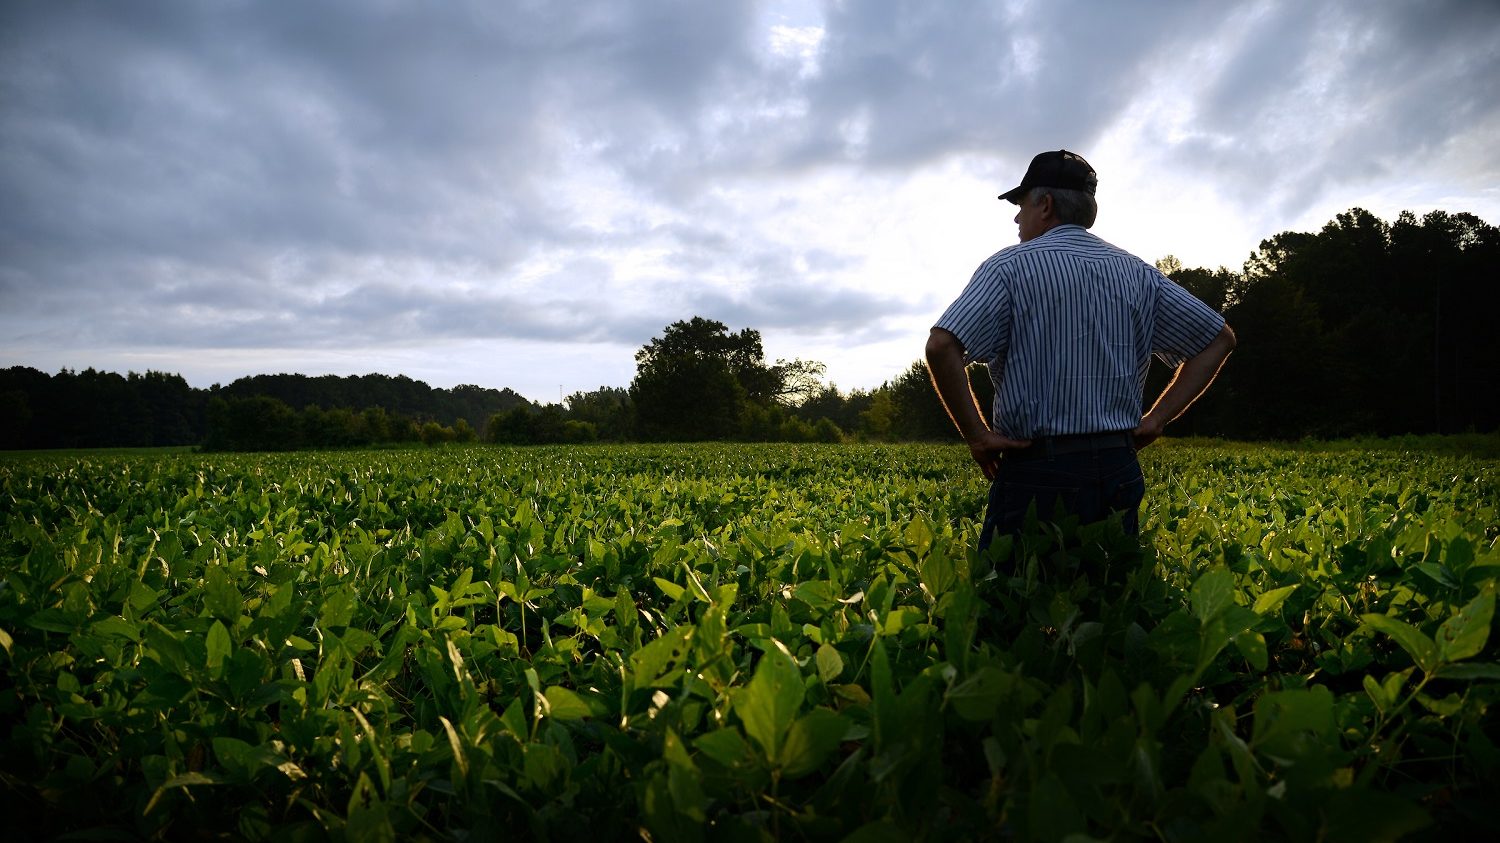 Farmer out standing in his soybean field. Photo credit Roger W Winstead